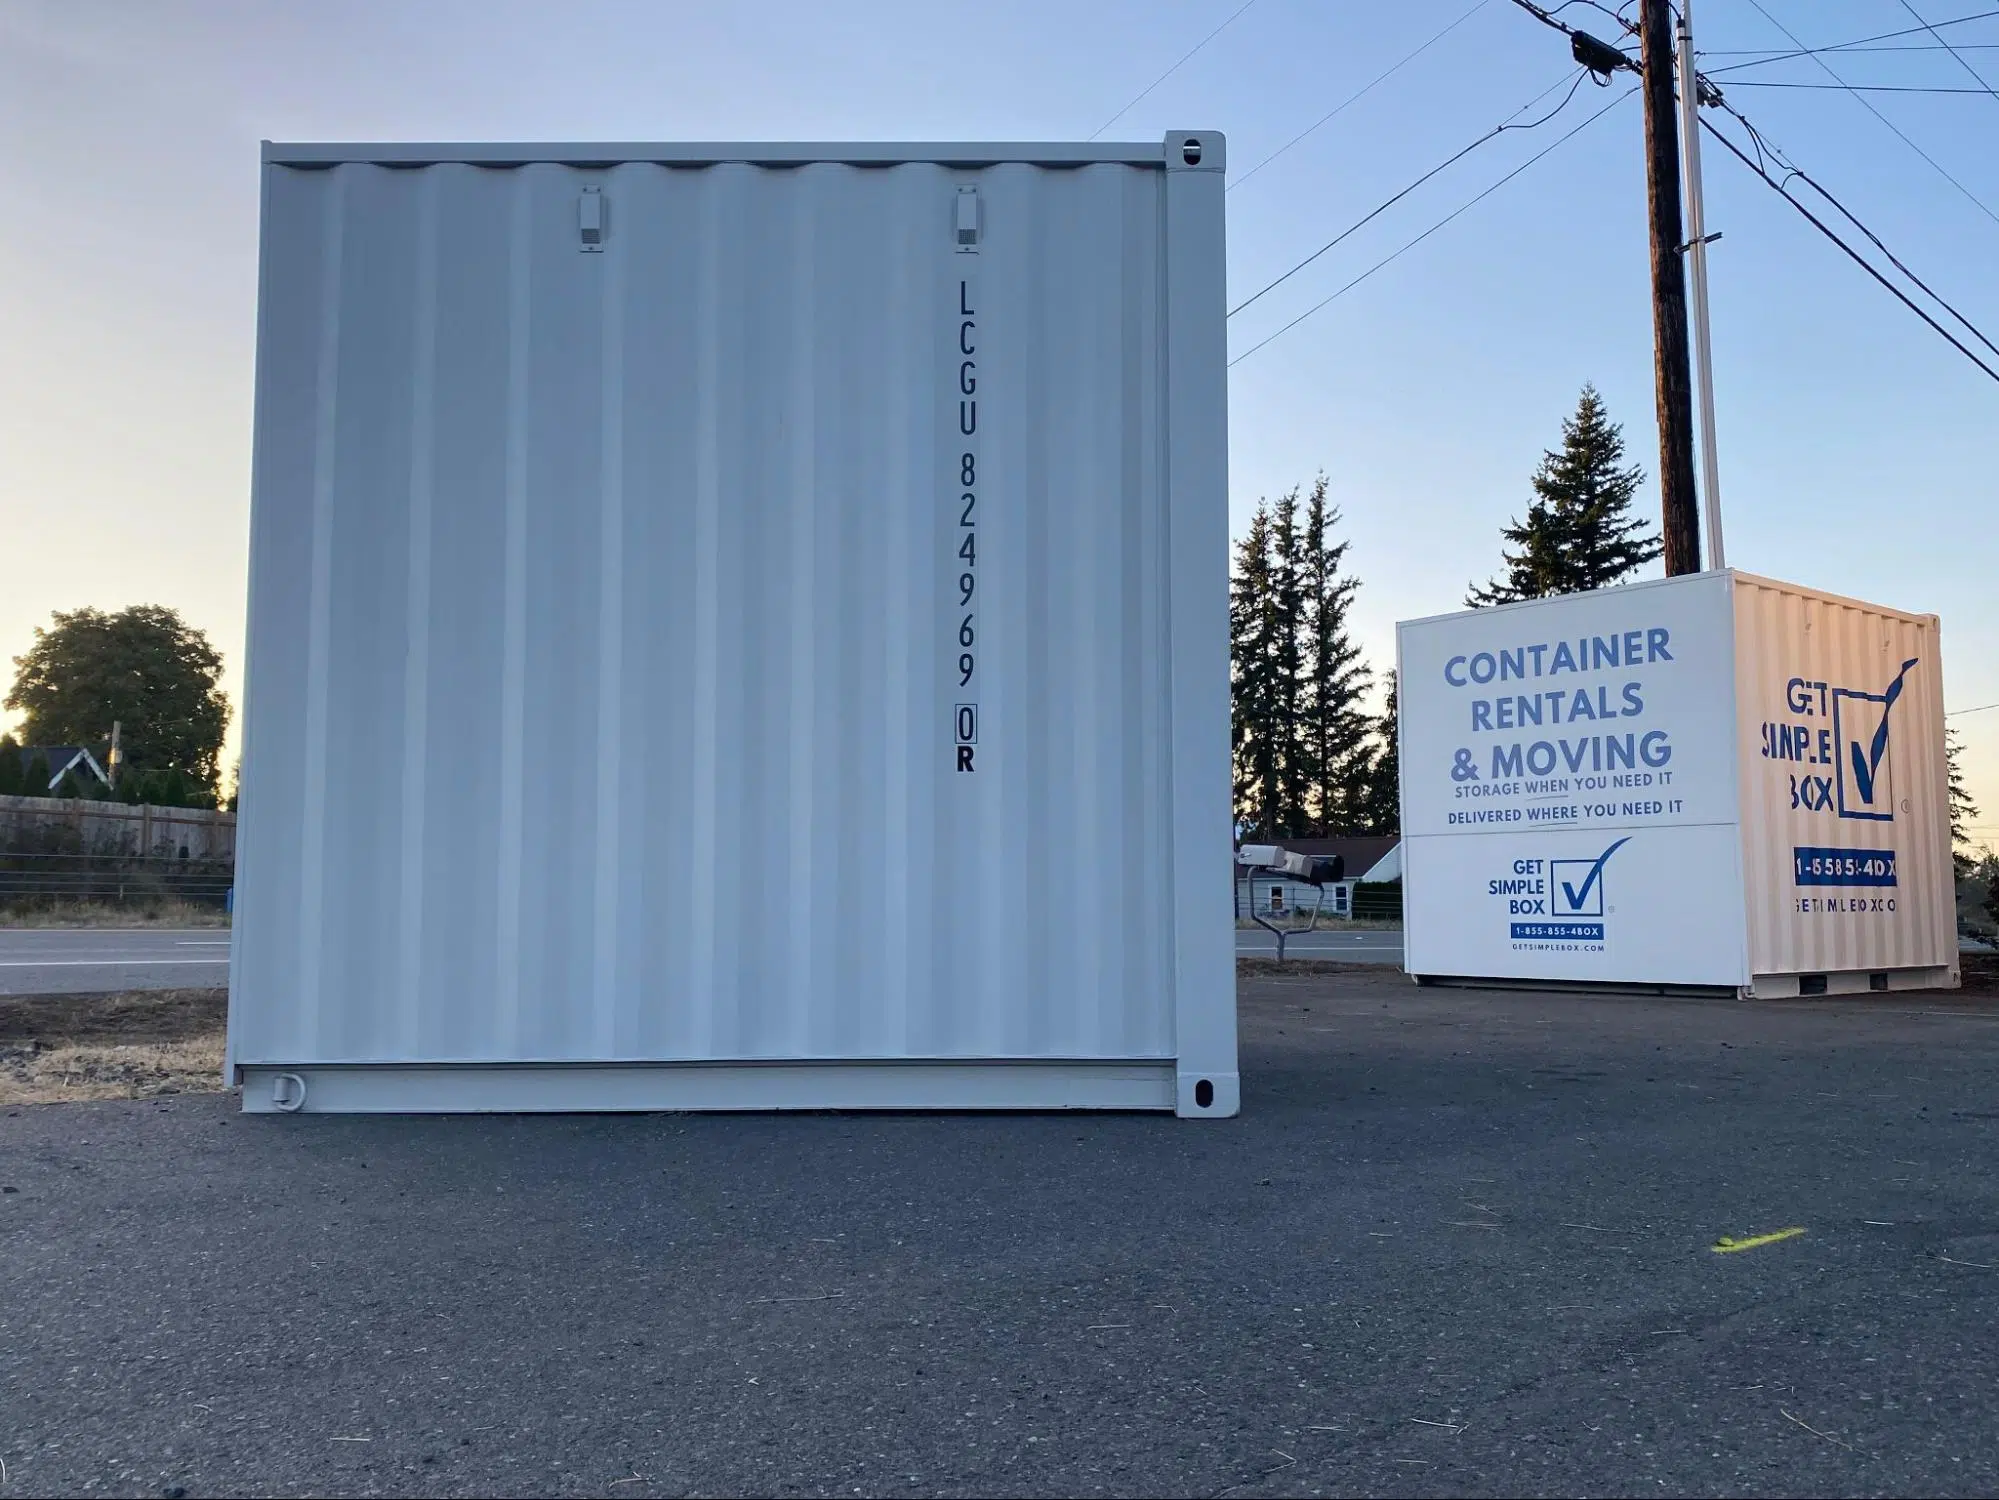 Two 10 foot shipping containers located at a yard and one with a vinyl sign